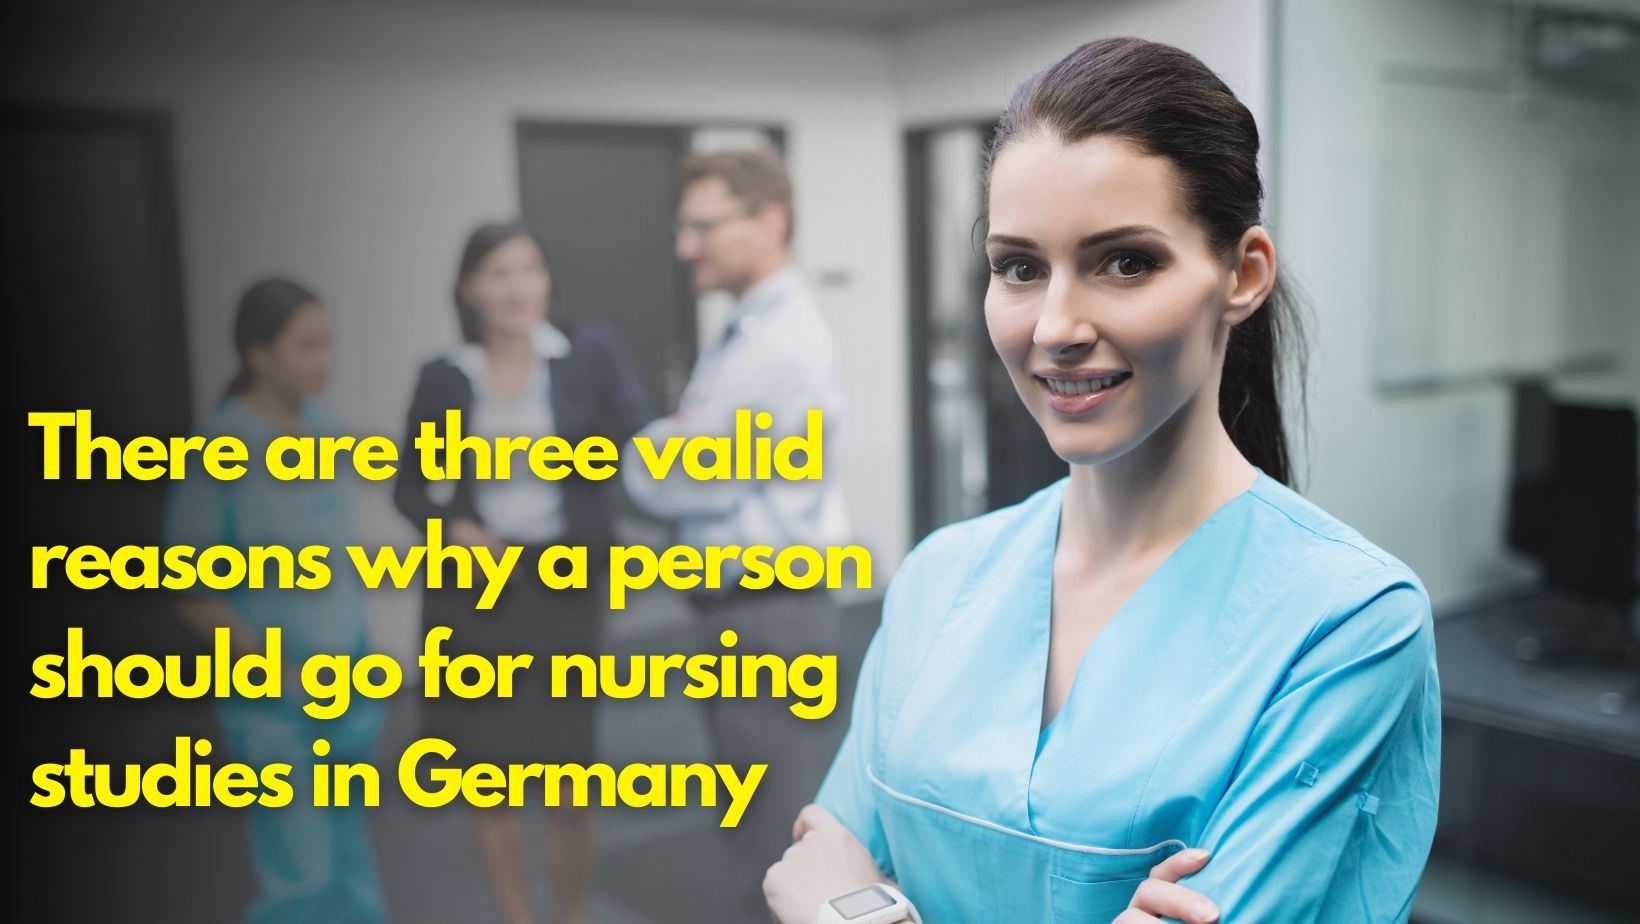 There are three valid reasons why a person should go for nursing studies in Germany.